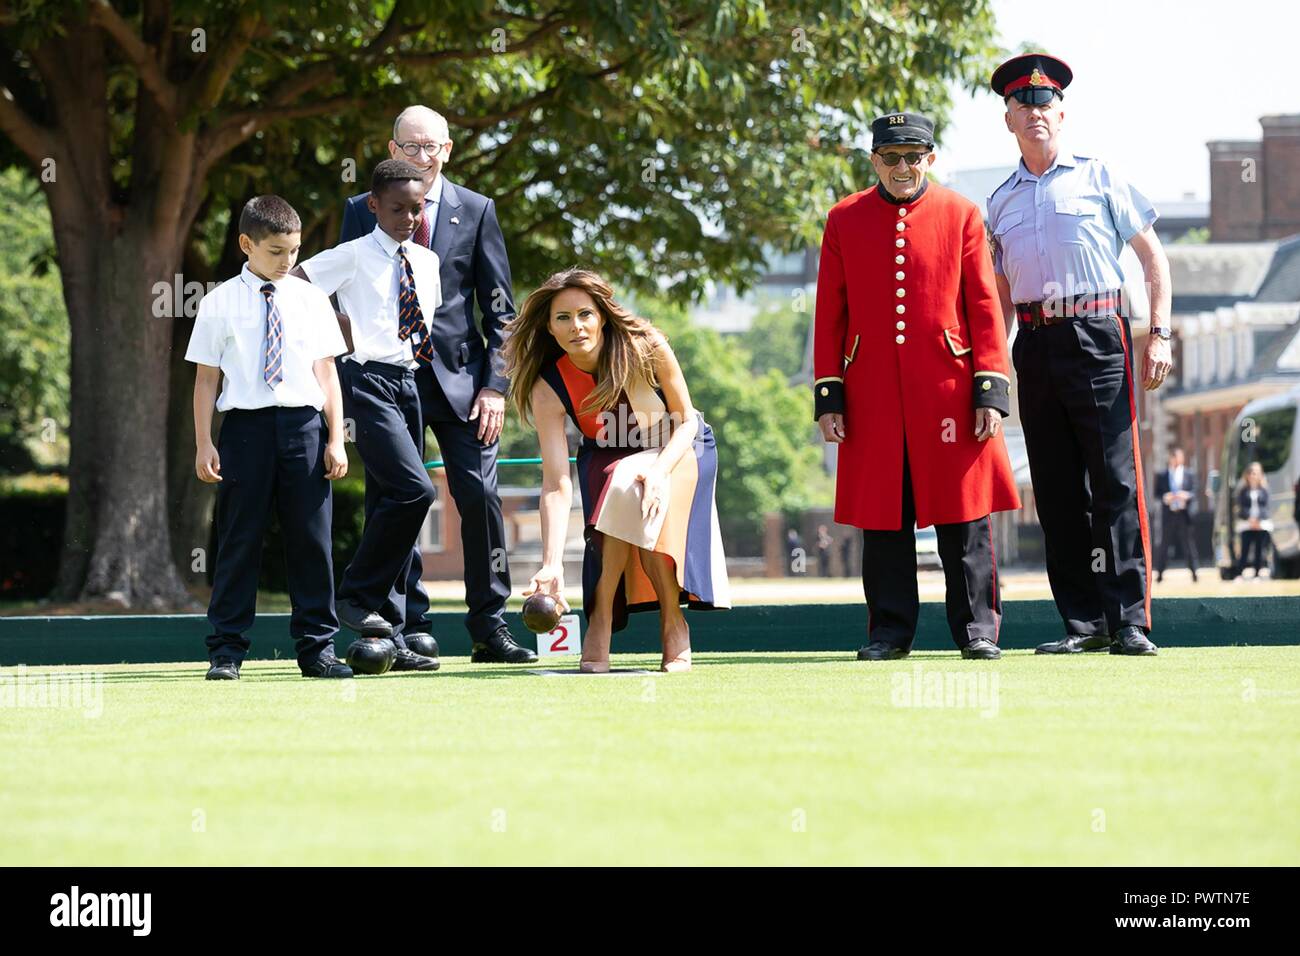 U.S First Lady Melania Trump and Philip May, husband of British Prime Minister Theresa May, try their hand at bowls during a visit to the Royal Hospital Chelsea July 13, 2018 in London, United Kingdom. Stock Photo